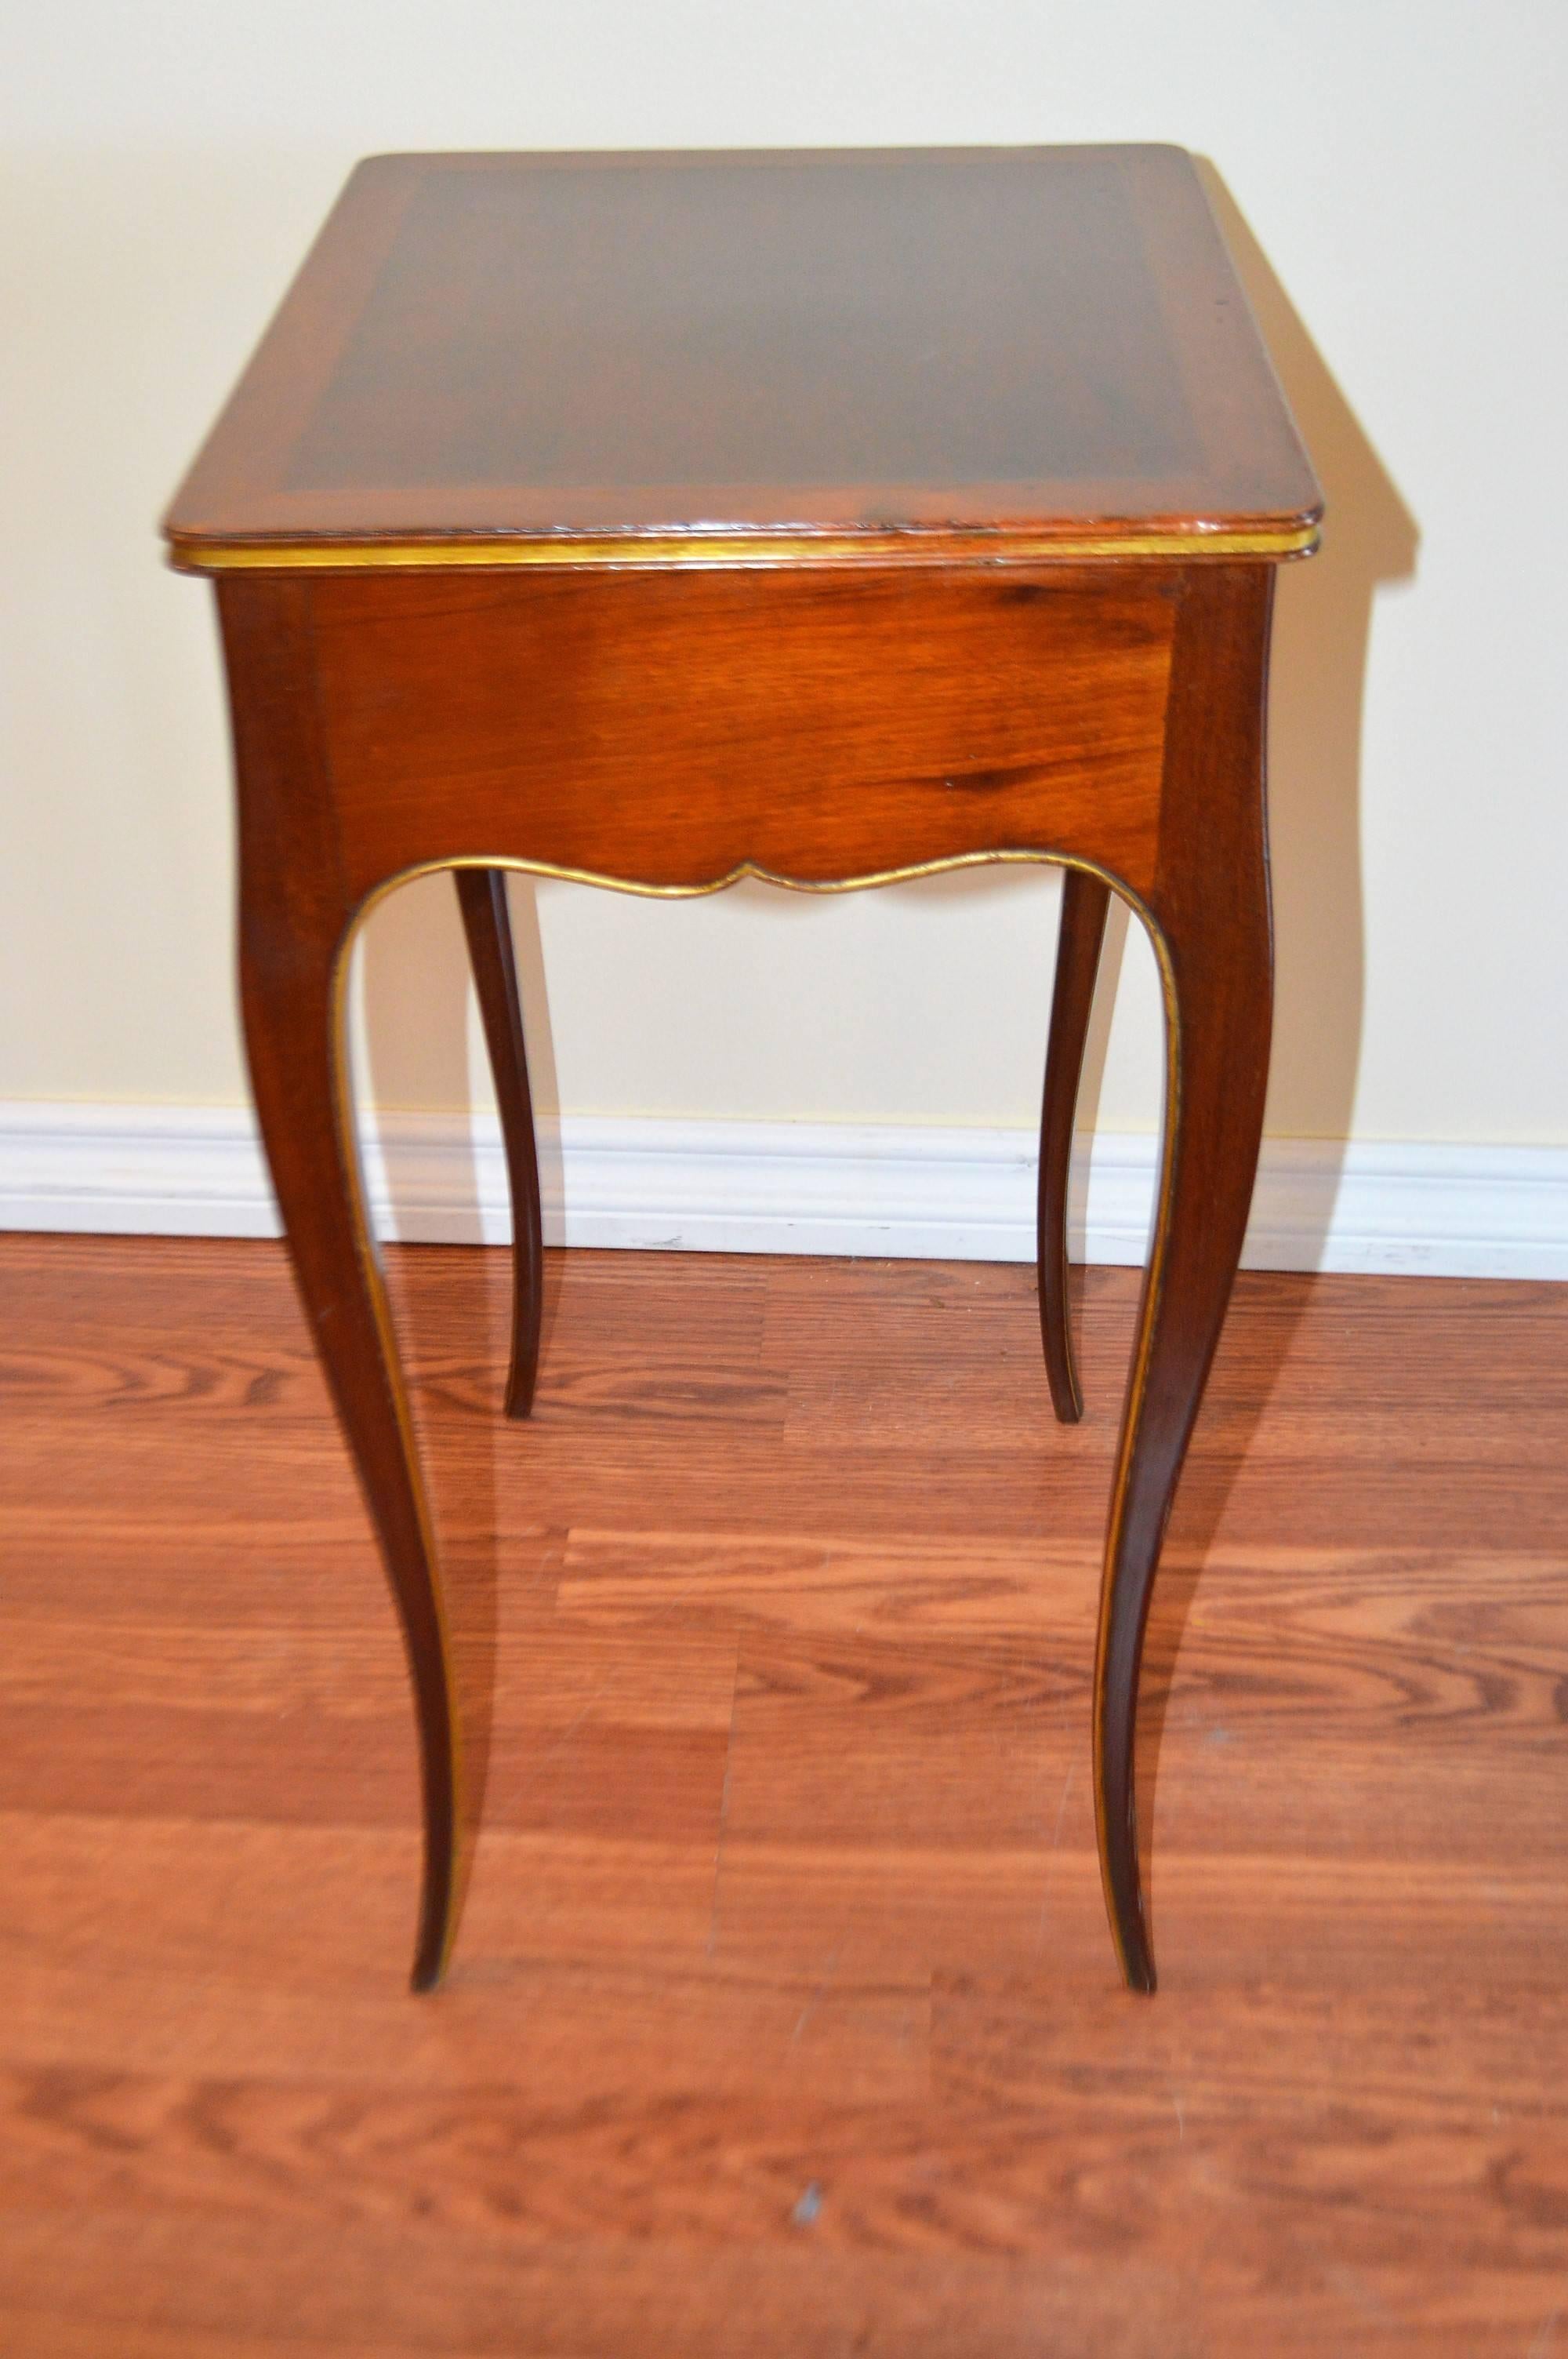 20th Century Pair of Elegant Mahogany Side Tables, Gilded Molding, Drawer and Pull-Out Table